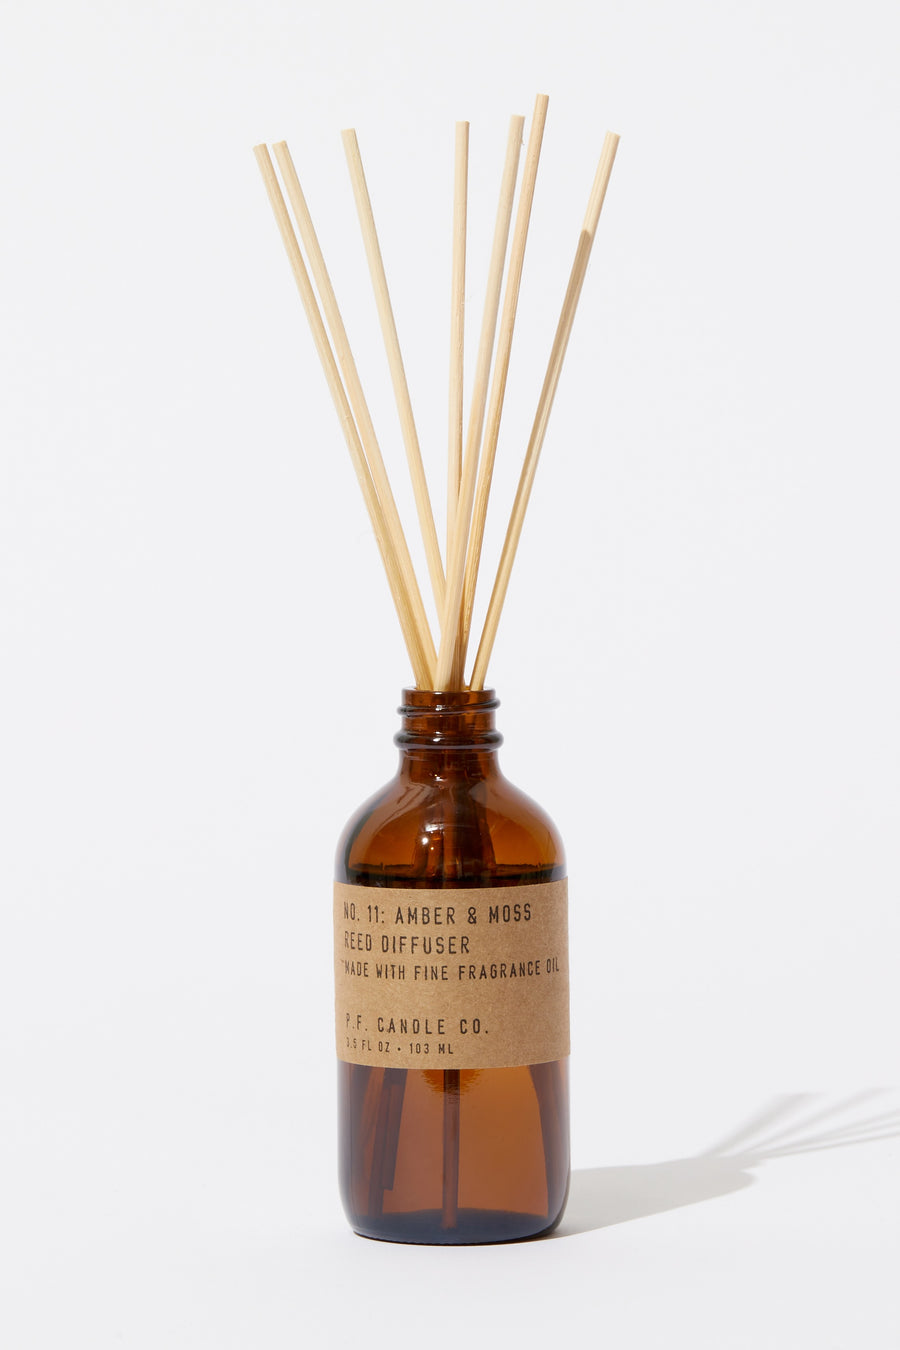 P.F. Candle Co. Reed Diffuser - Amber & Moss